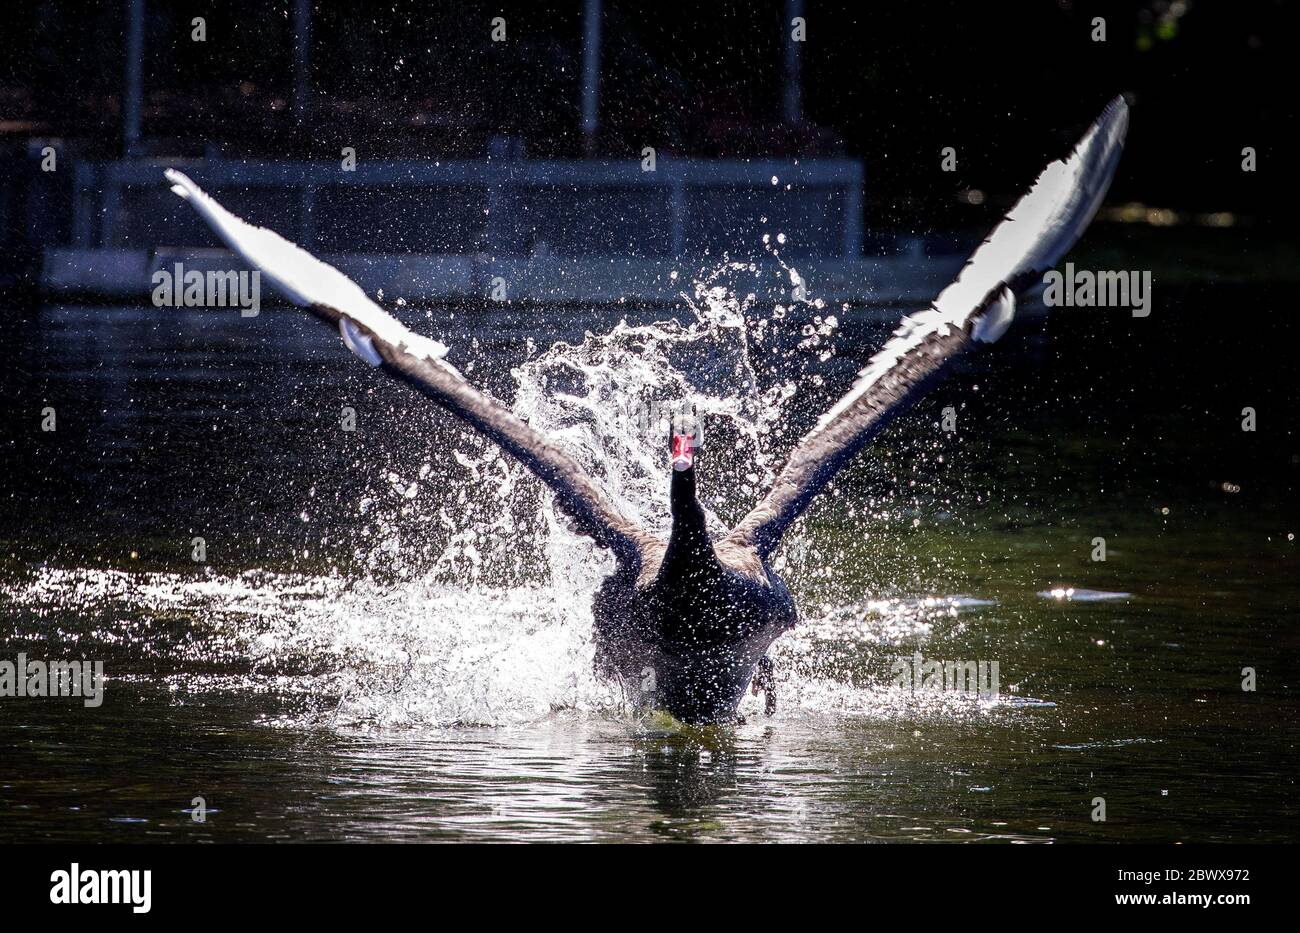 Black Swan Event High Resolution Stock Photography and Images - Alamy